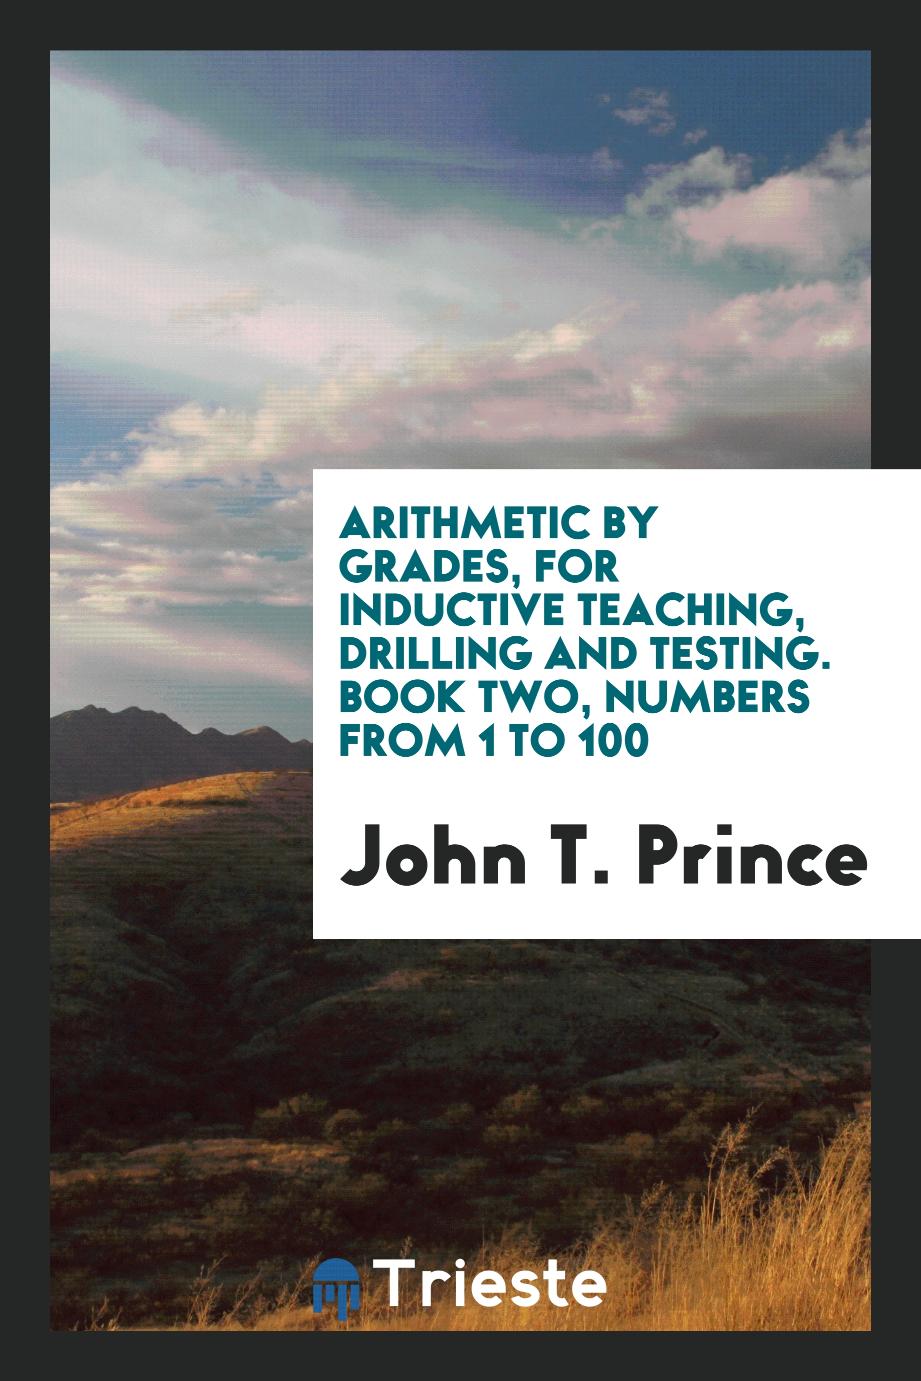 Arithmetic by Grades, for Inductive Teaching, Drilling and Testing. Book Two, Numbers from 1 to 100